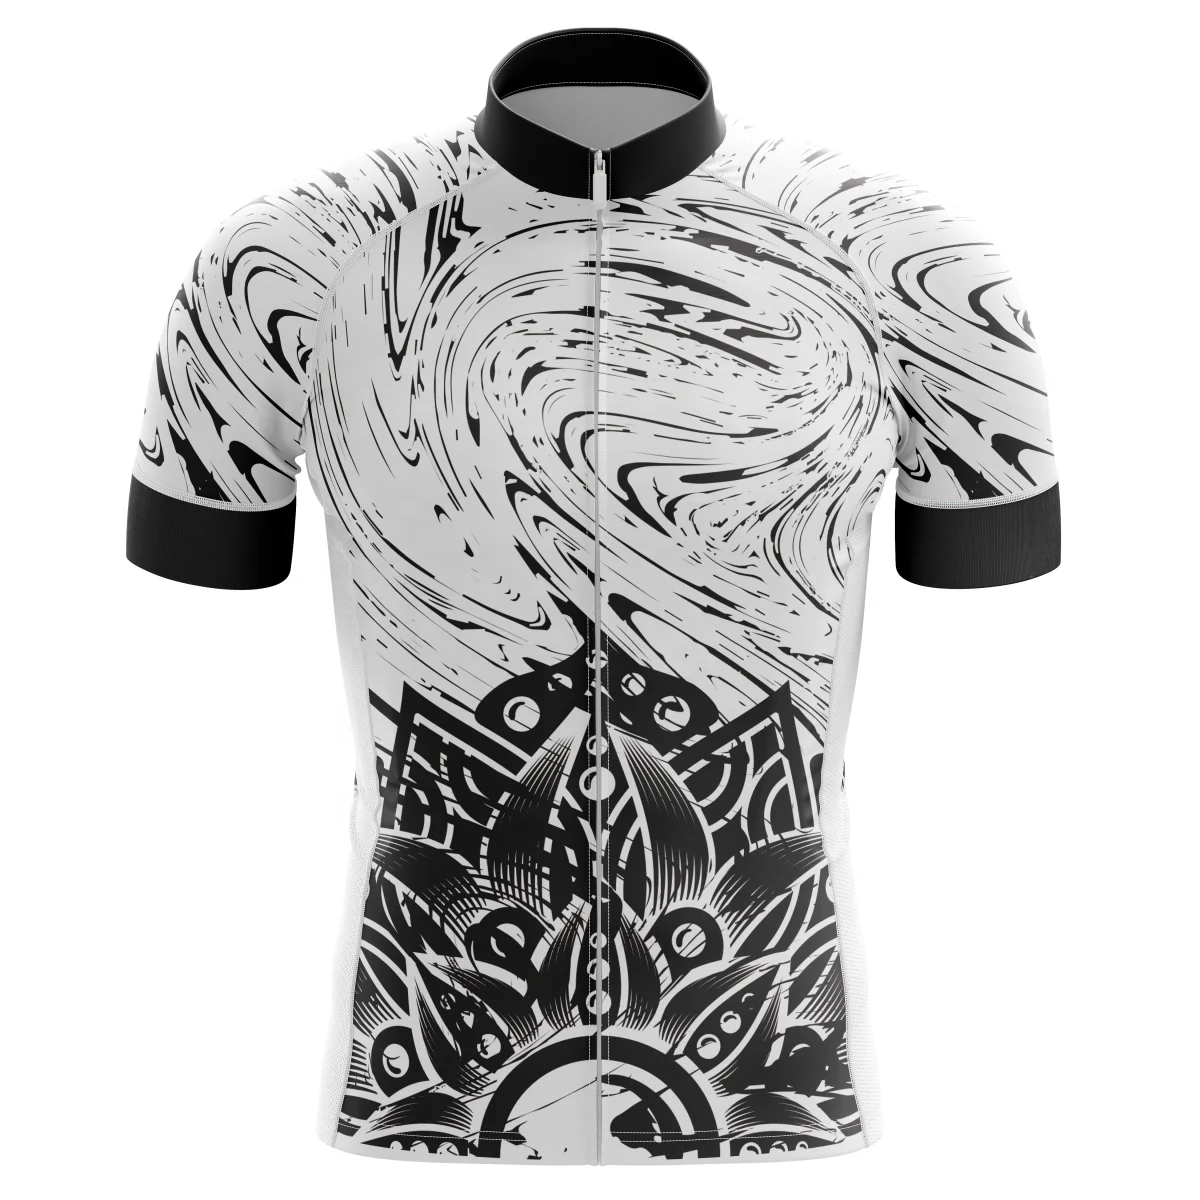 

HIRBGOD New Cycling Jersey for Chilean White Irregular Shading Pattern Men's Bicycle Clothes Plus Size Bike Wear,TYYZ599-01